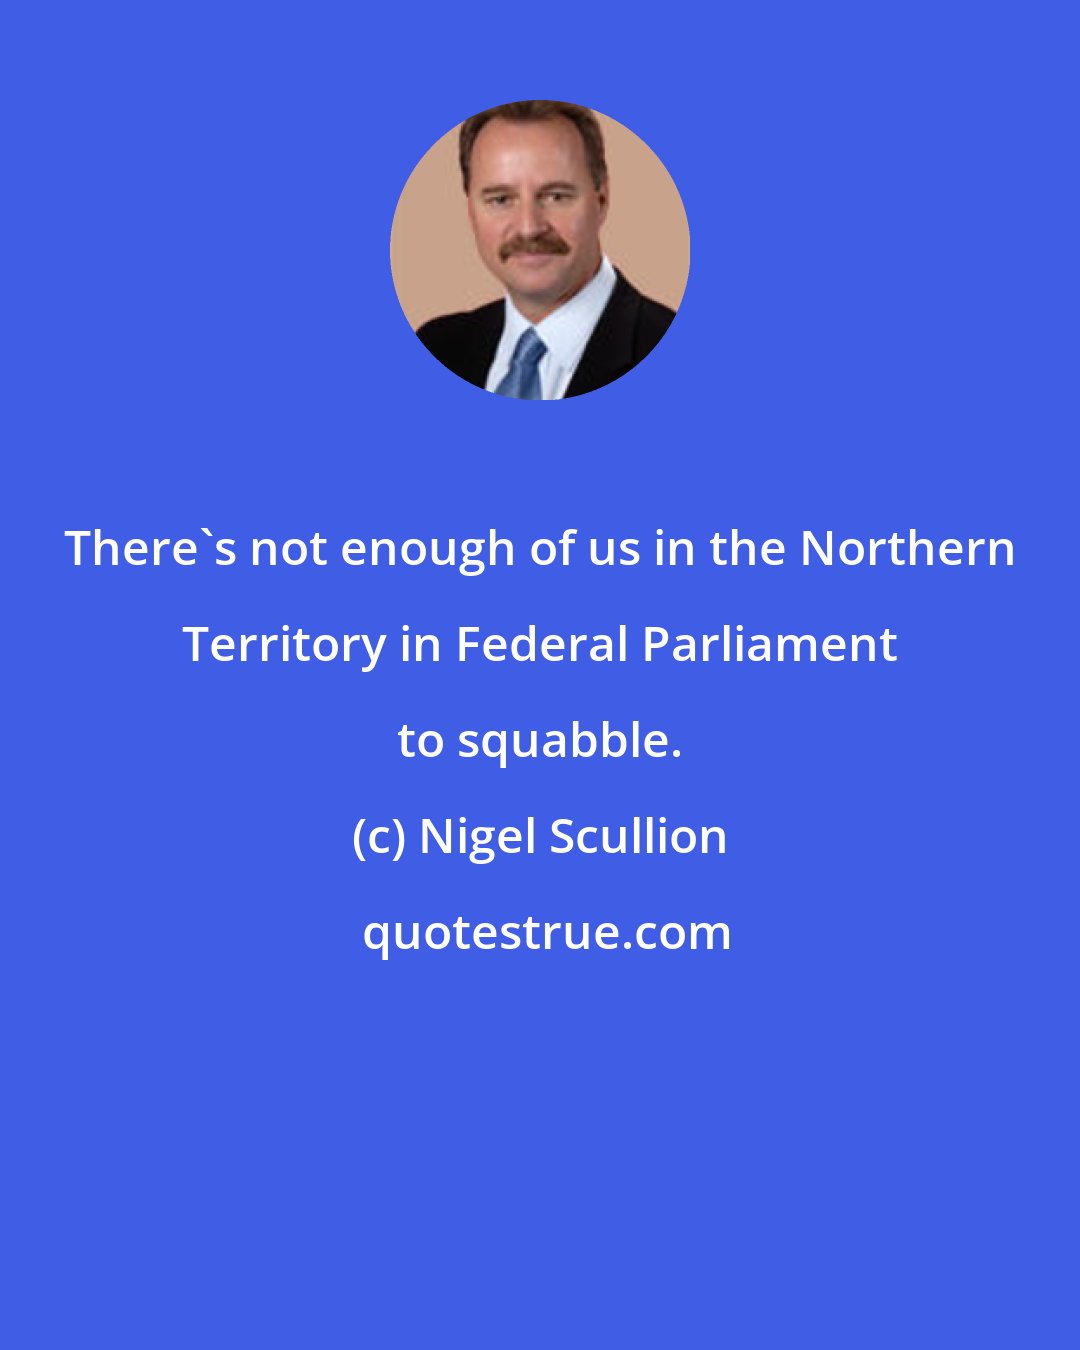 Nigel Scullion: There's not enough of us in the Northern Territory in Federal Parliament to squabble.